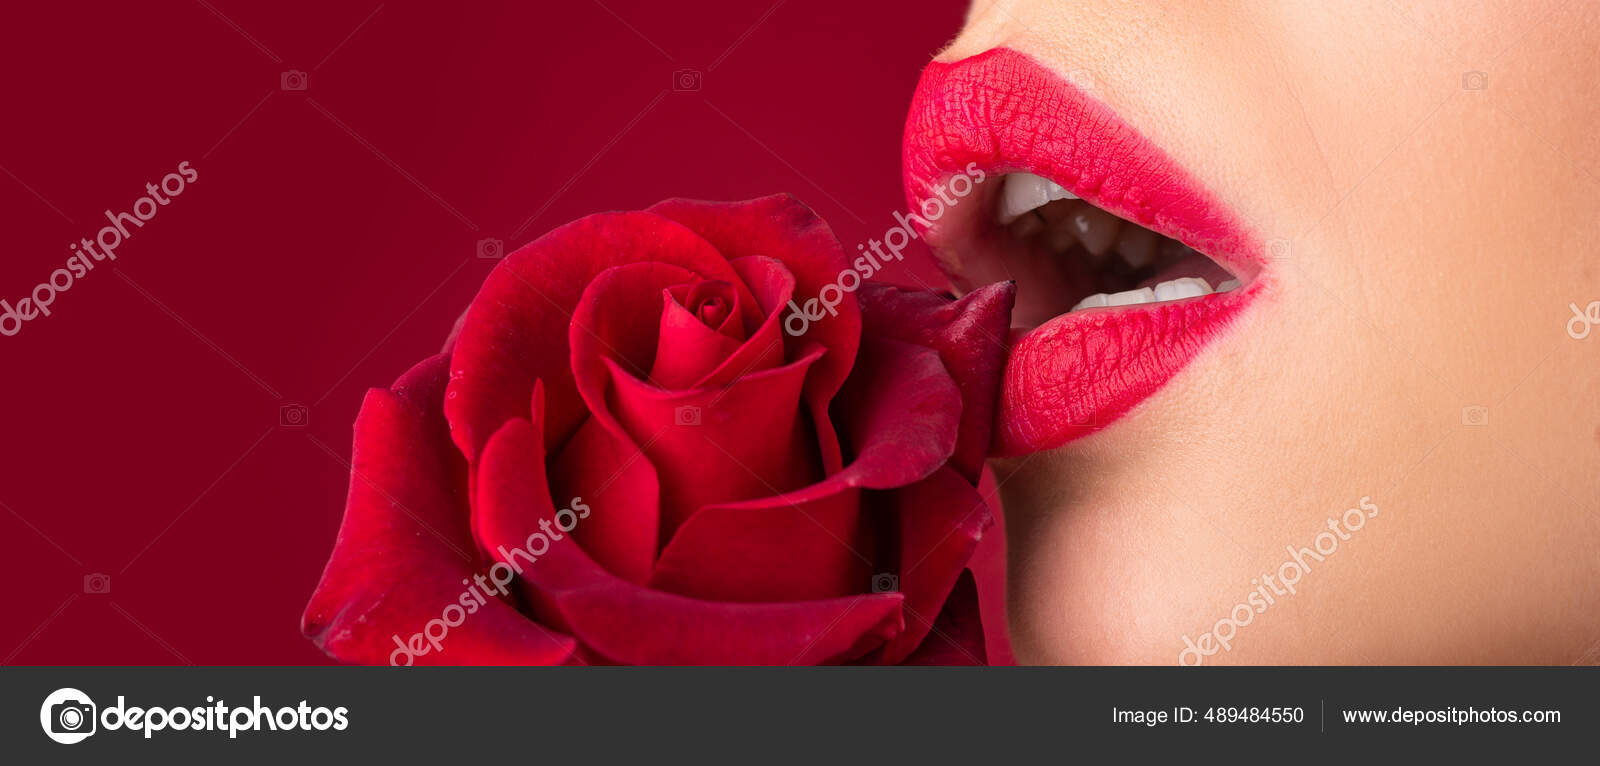 Girl blowjob with tongue, oral sex, symbol. Lips with lipstick closeup picture